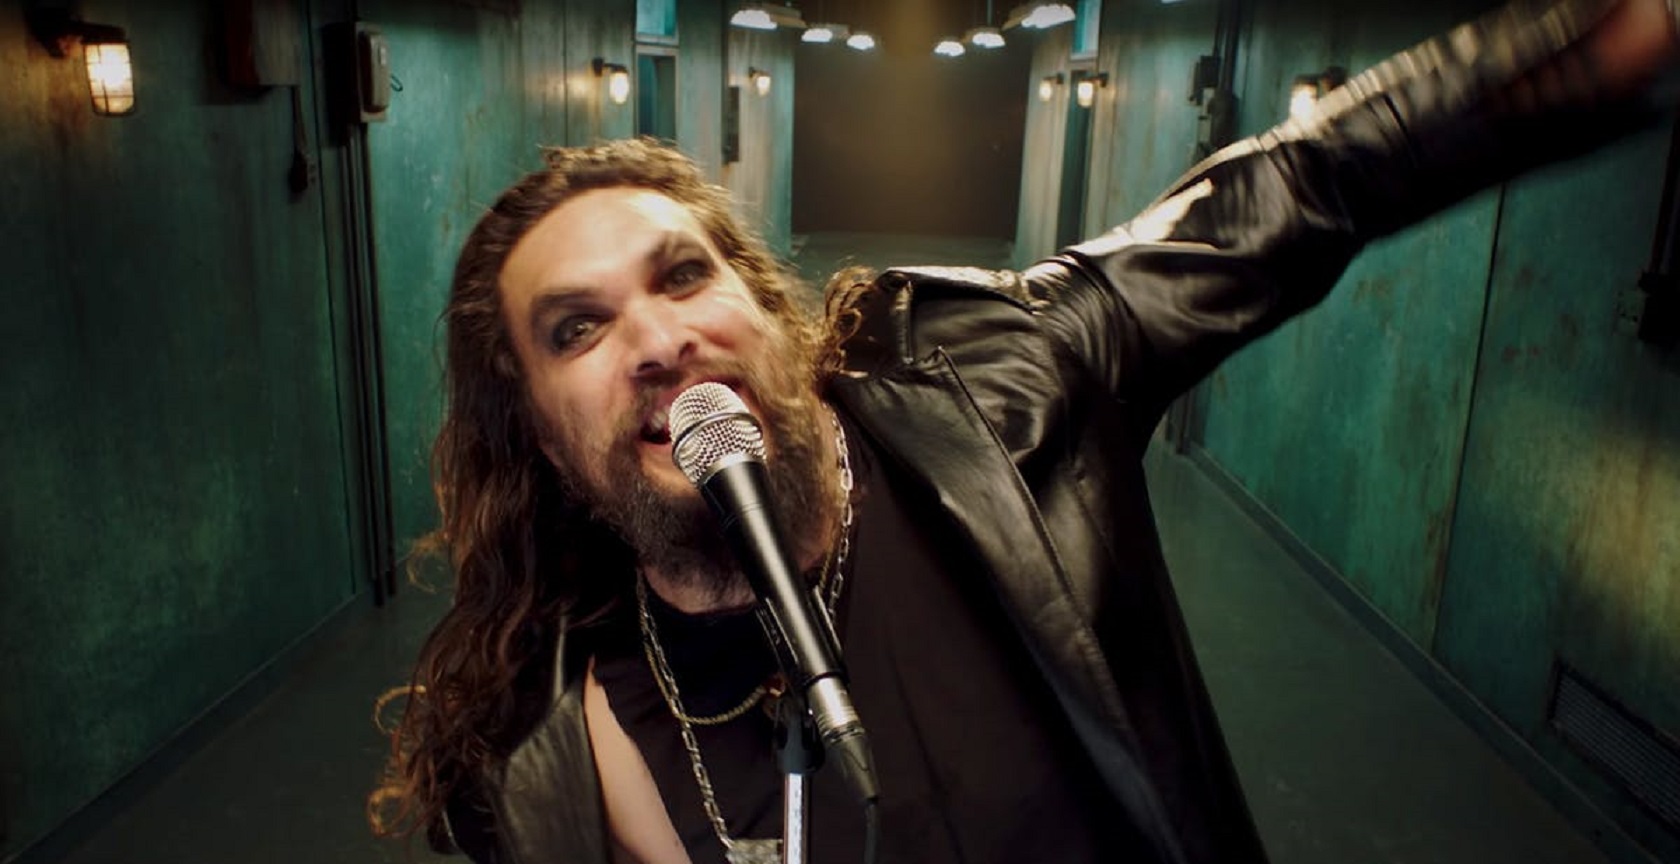 Watch: Jason Momoa Plays Ozzy Osbourne in New Music Video From The Singer